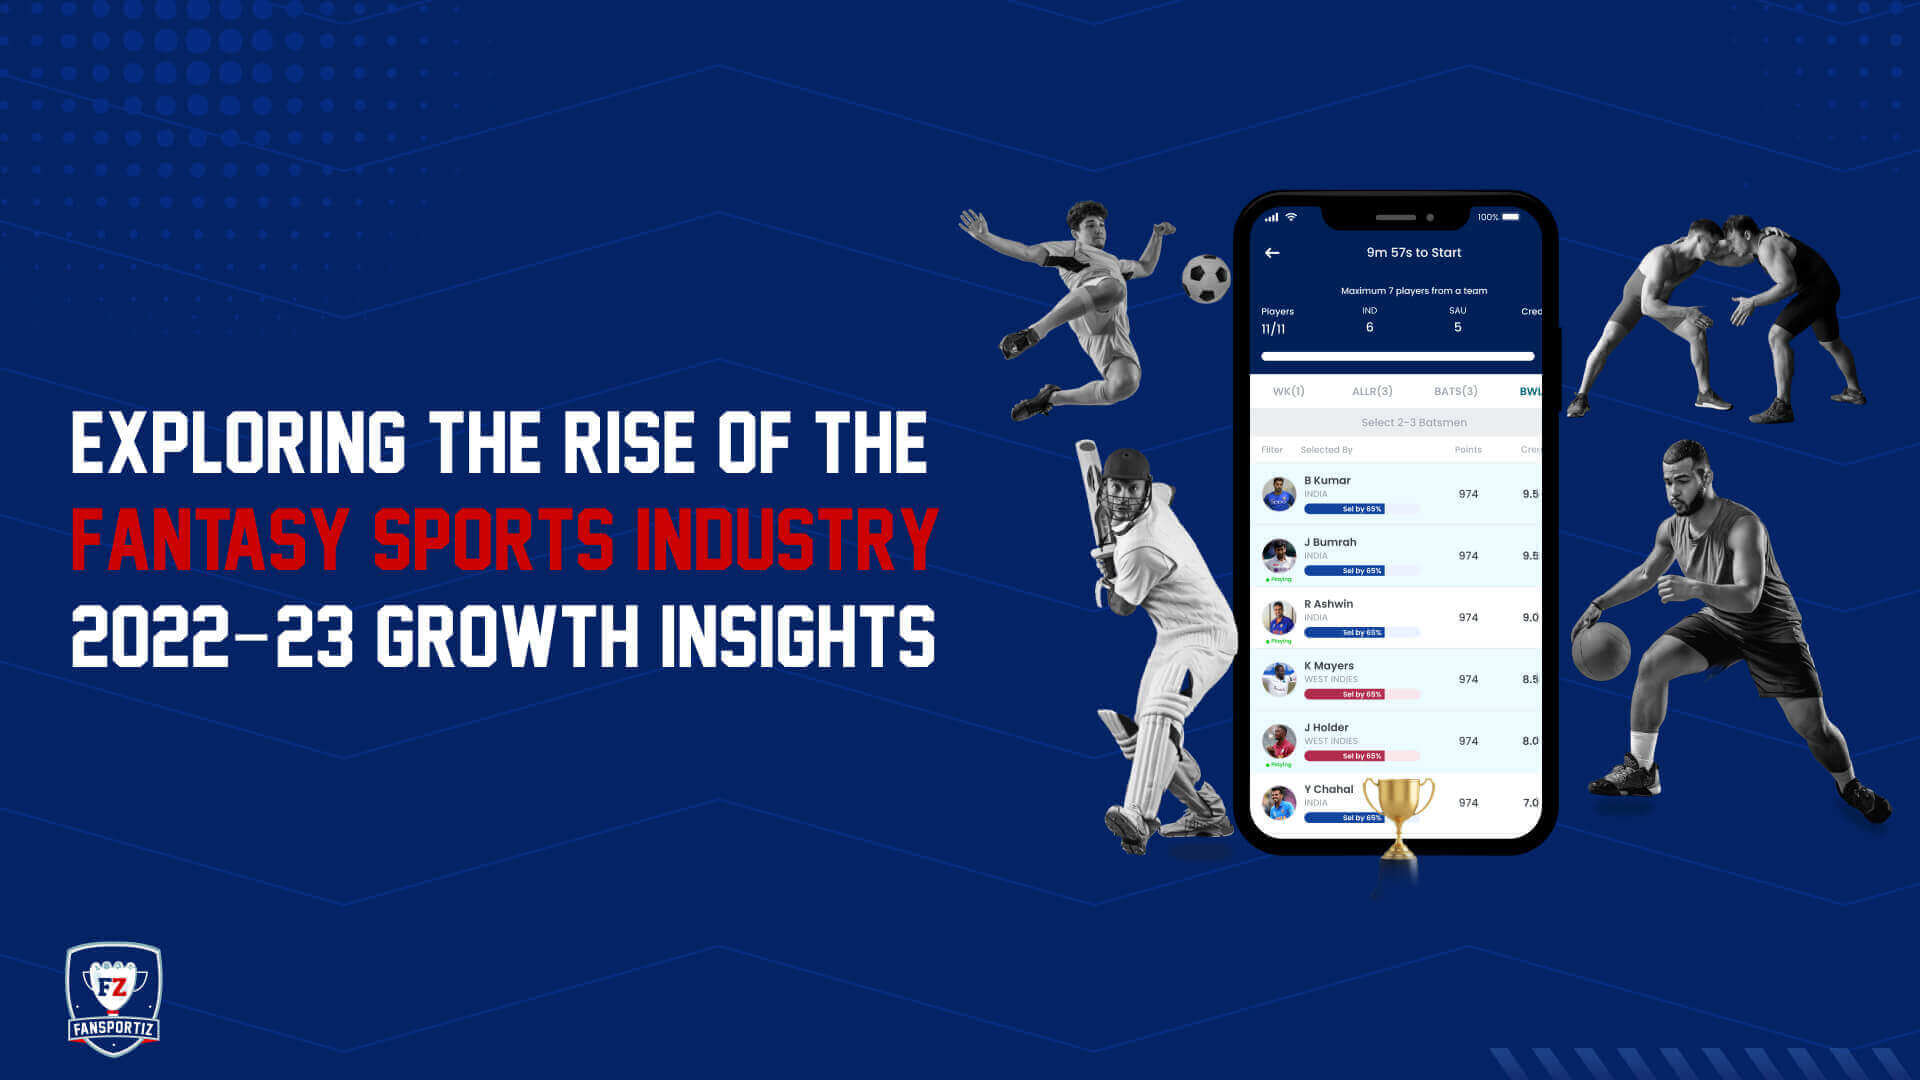 The Rise of the Fantasy Sports Industry: 2022-23 Growth Insights